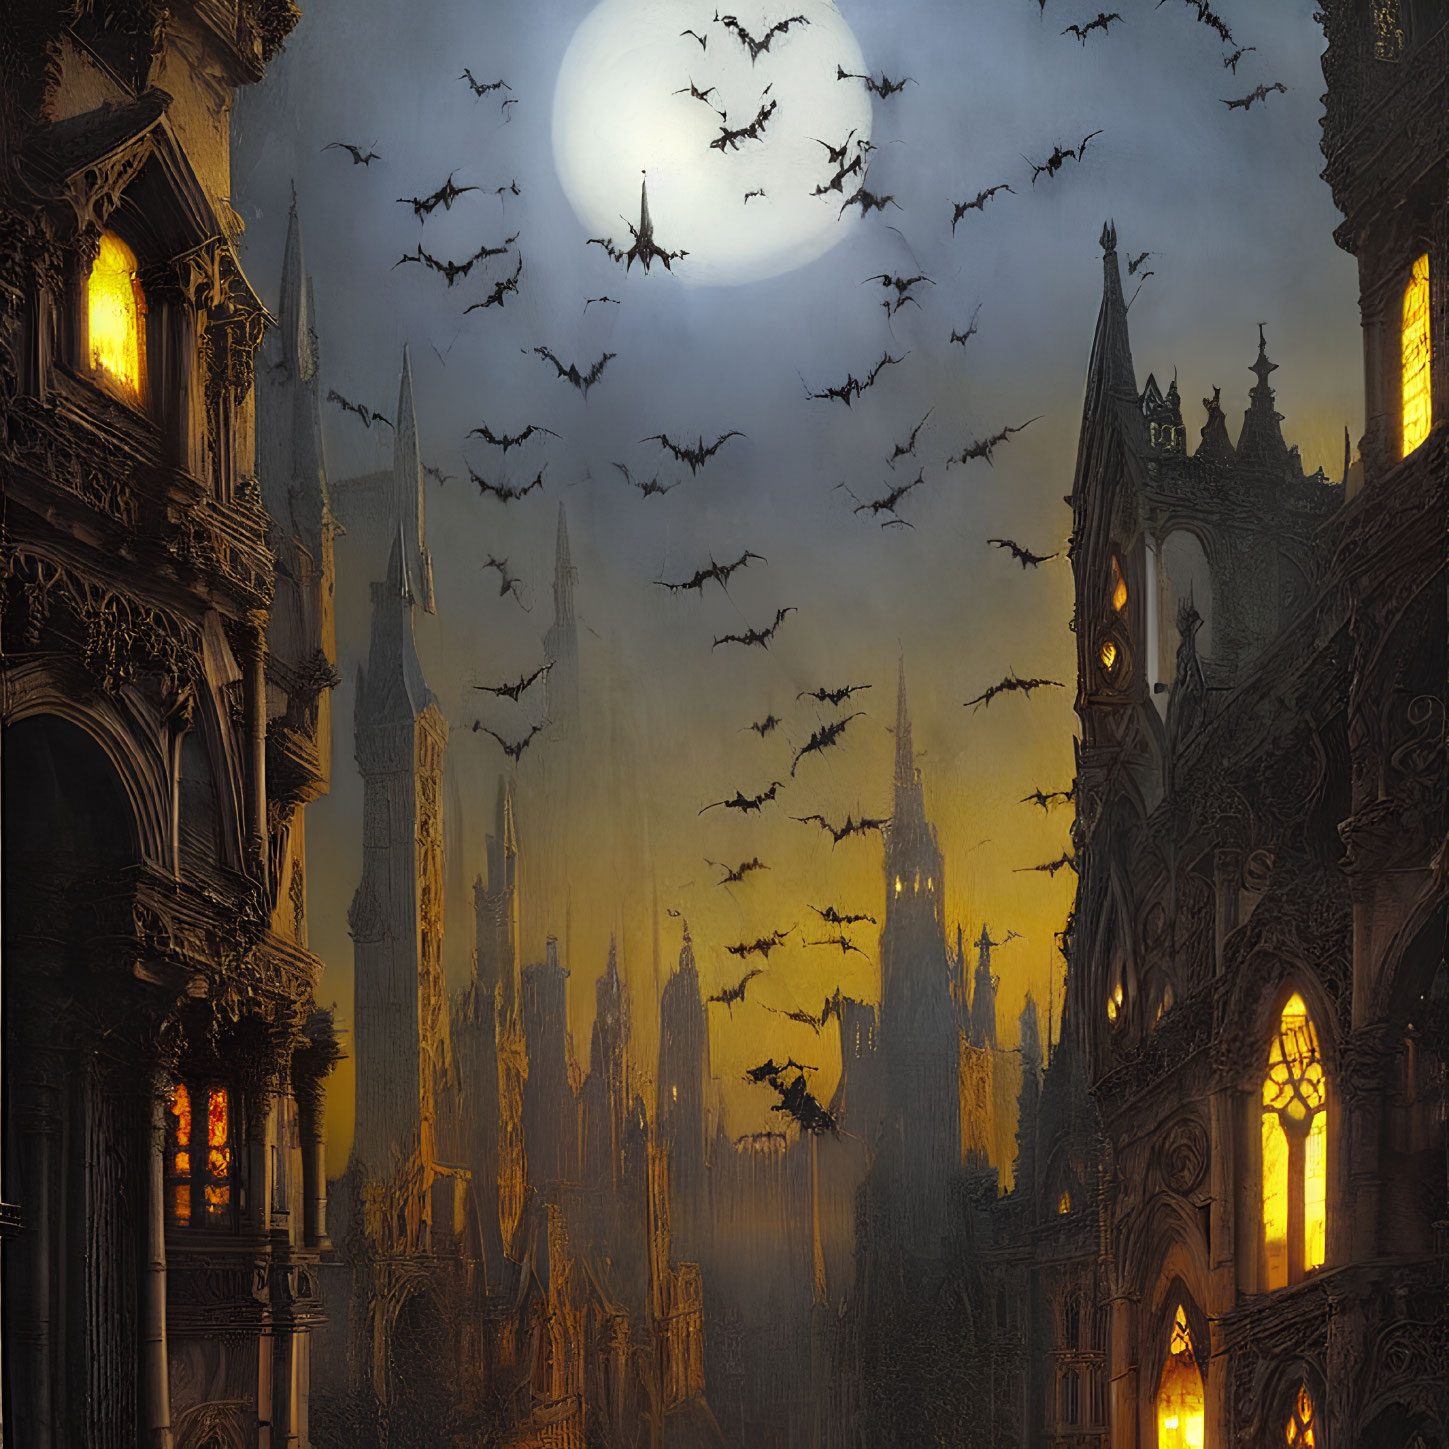 Gothic Architecture and Bats Silhouetted Against Moonlit Sky